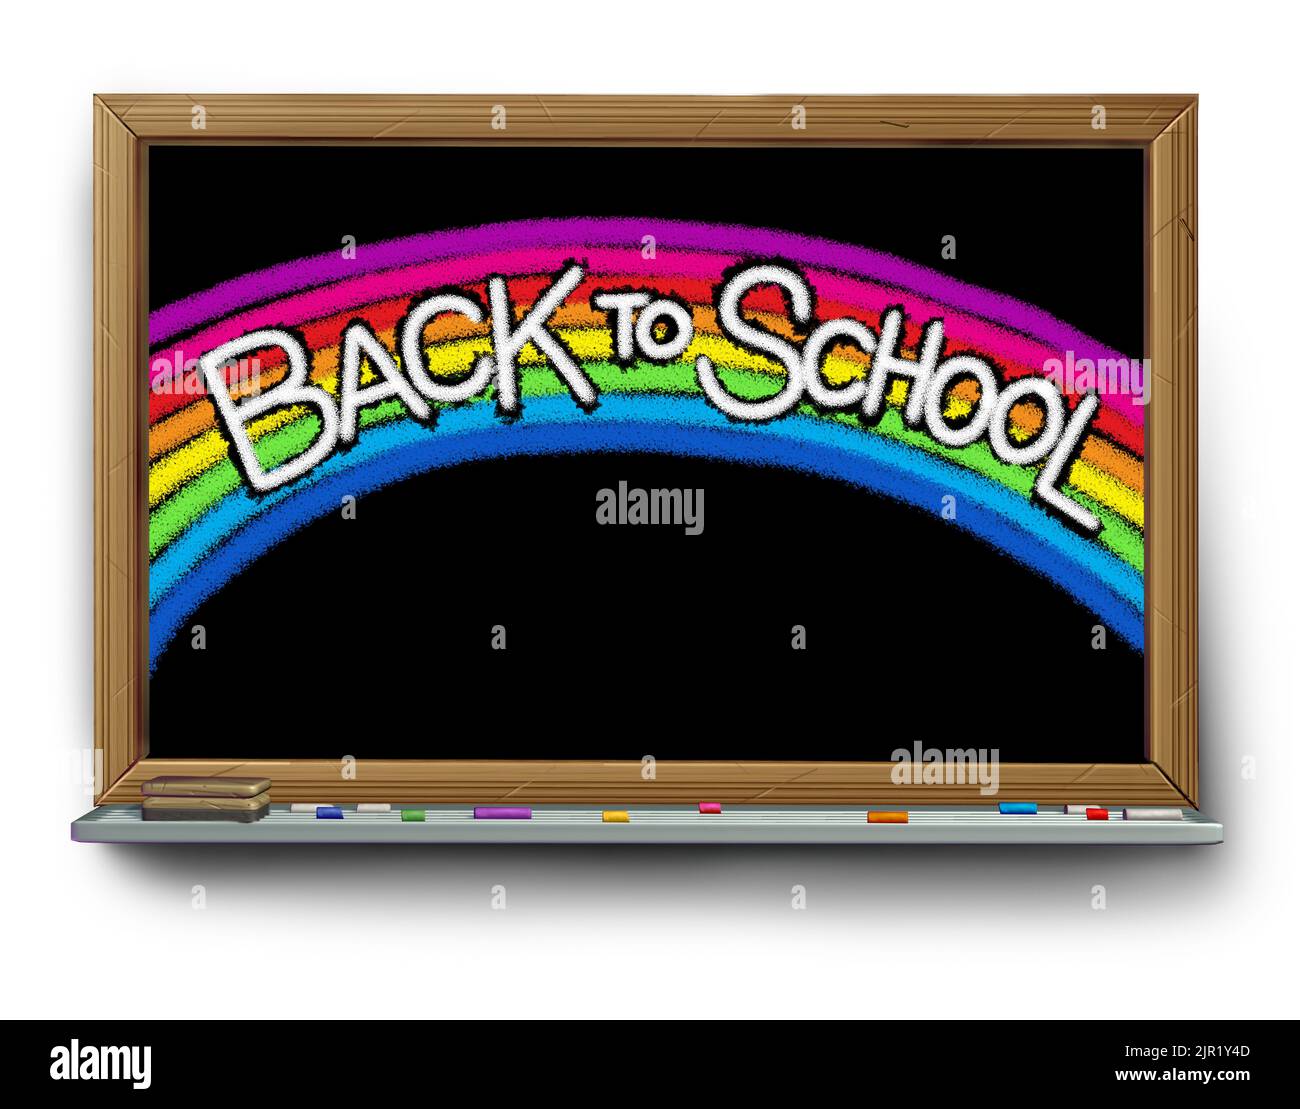 Back to school openings and hope rainbow concept as a student diversity and school inclusiveness concept as an education symbol for positive diverse. Stock Photo